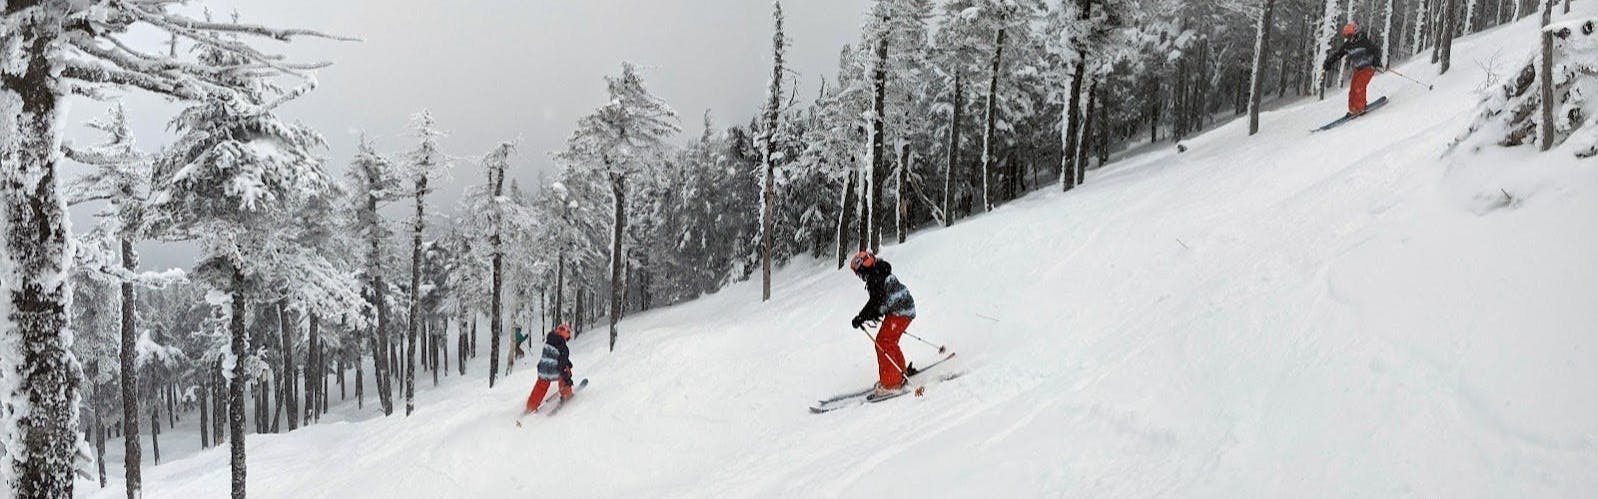 Two skiers turning down a snowy run with several trees.